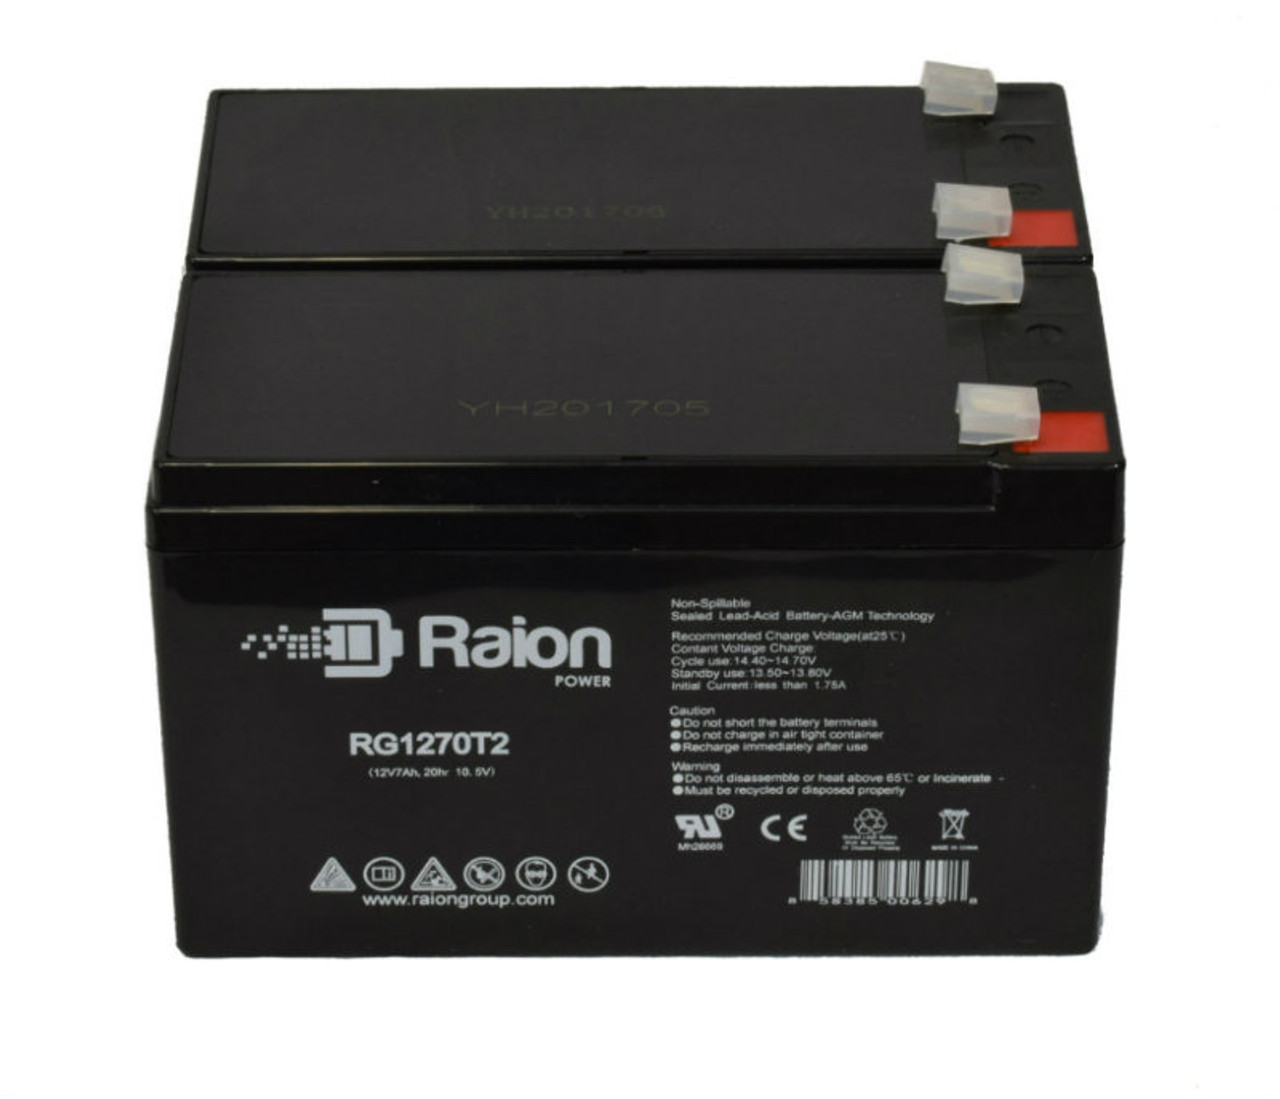 Raion Power Replacement 12V 7Ah Battery for GB SB12-7.2 - 2 Pack